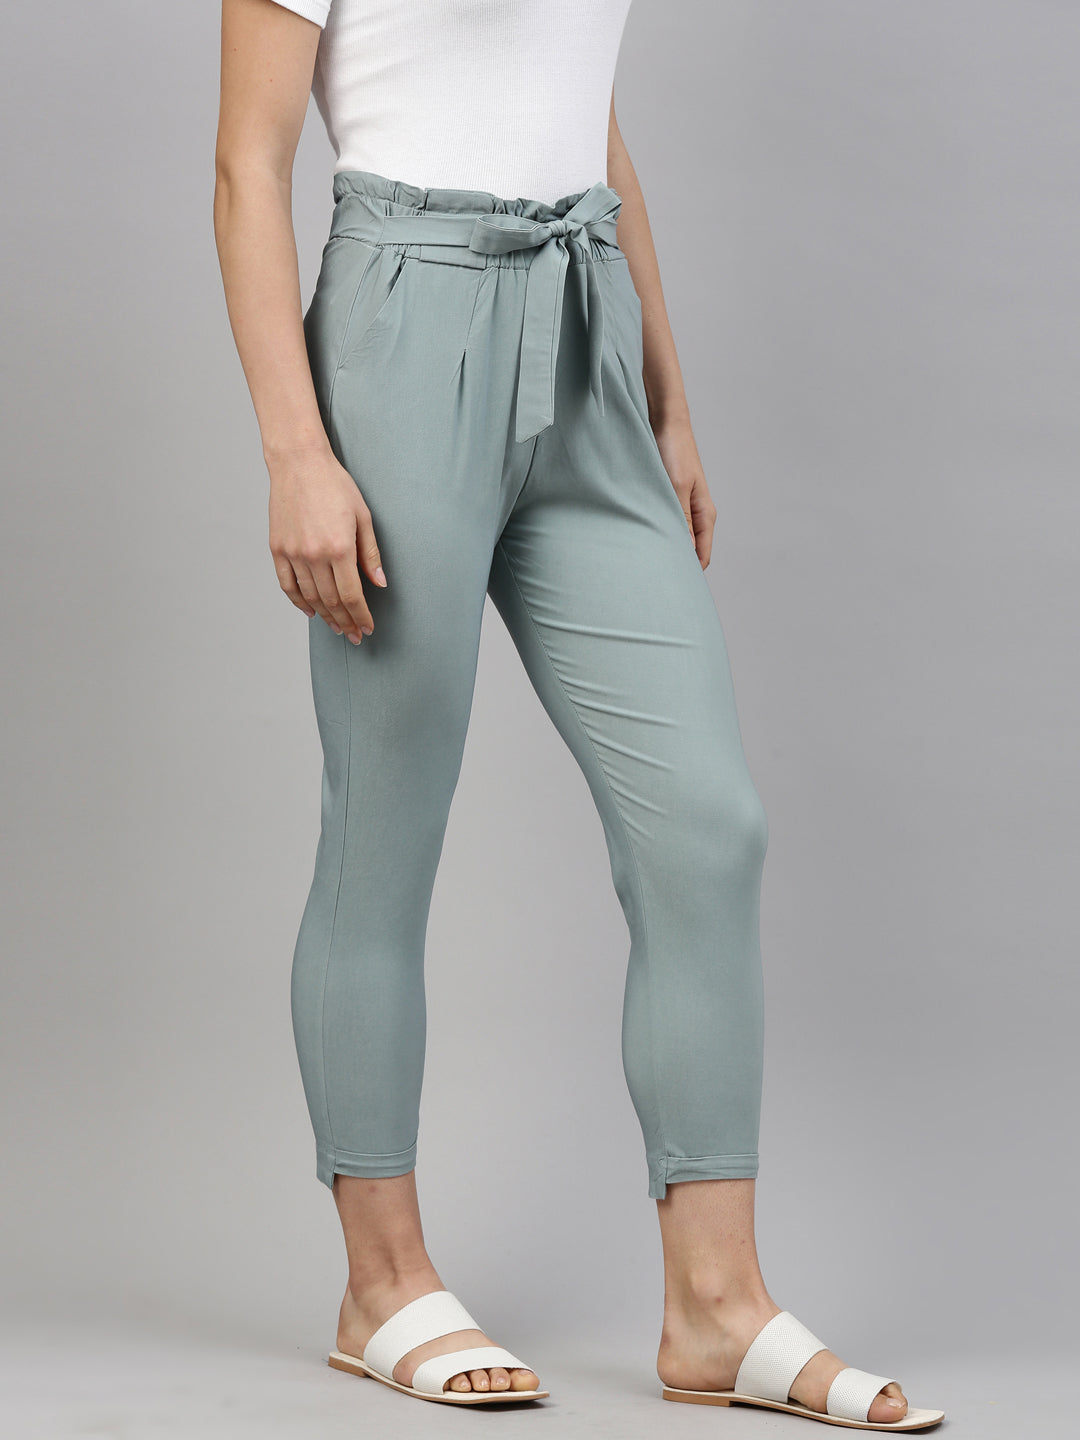 Combo Knot pant and top - Evilato